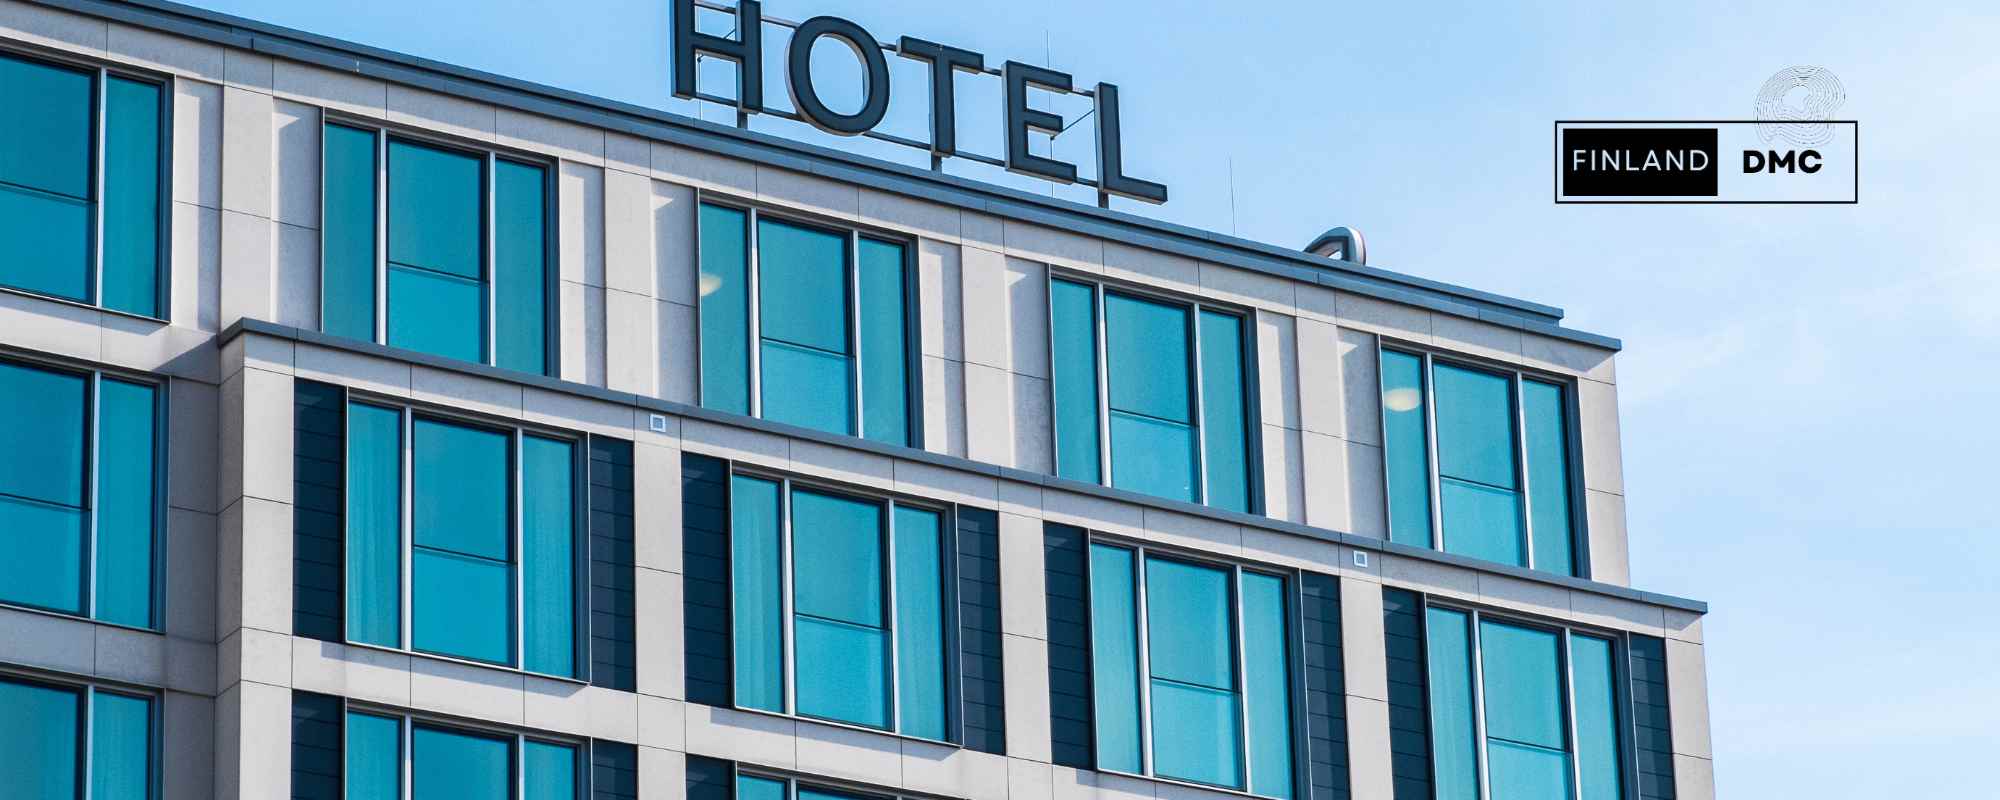 Visit Finland DMC's contracted hotels in Helsinki